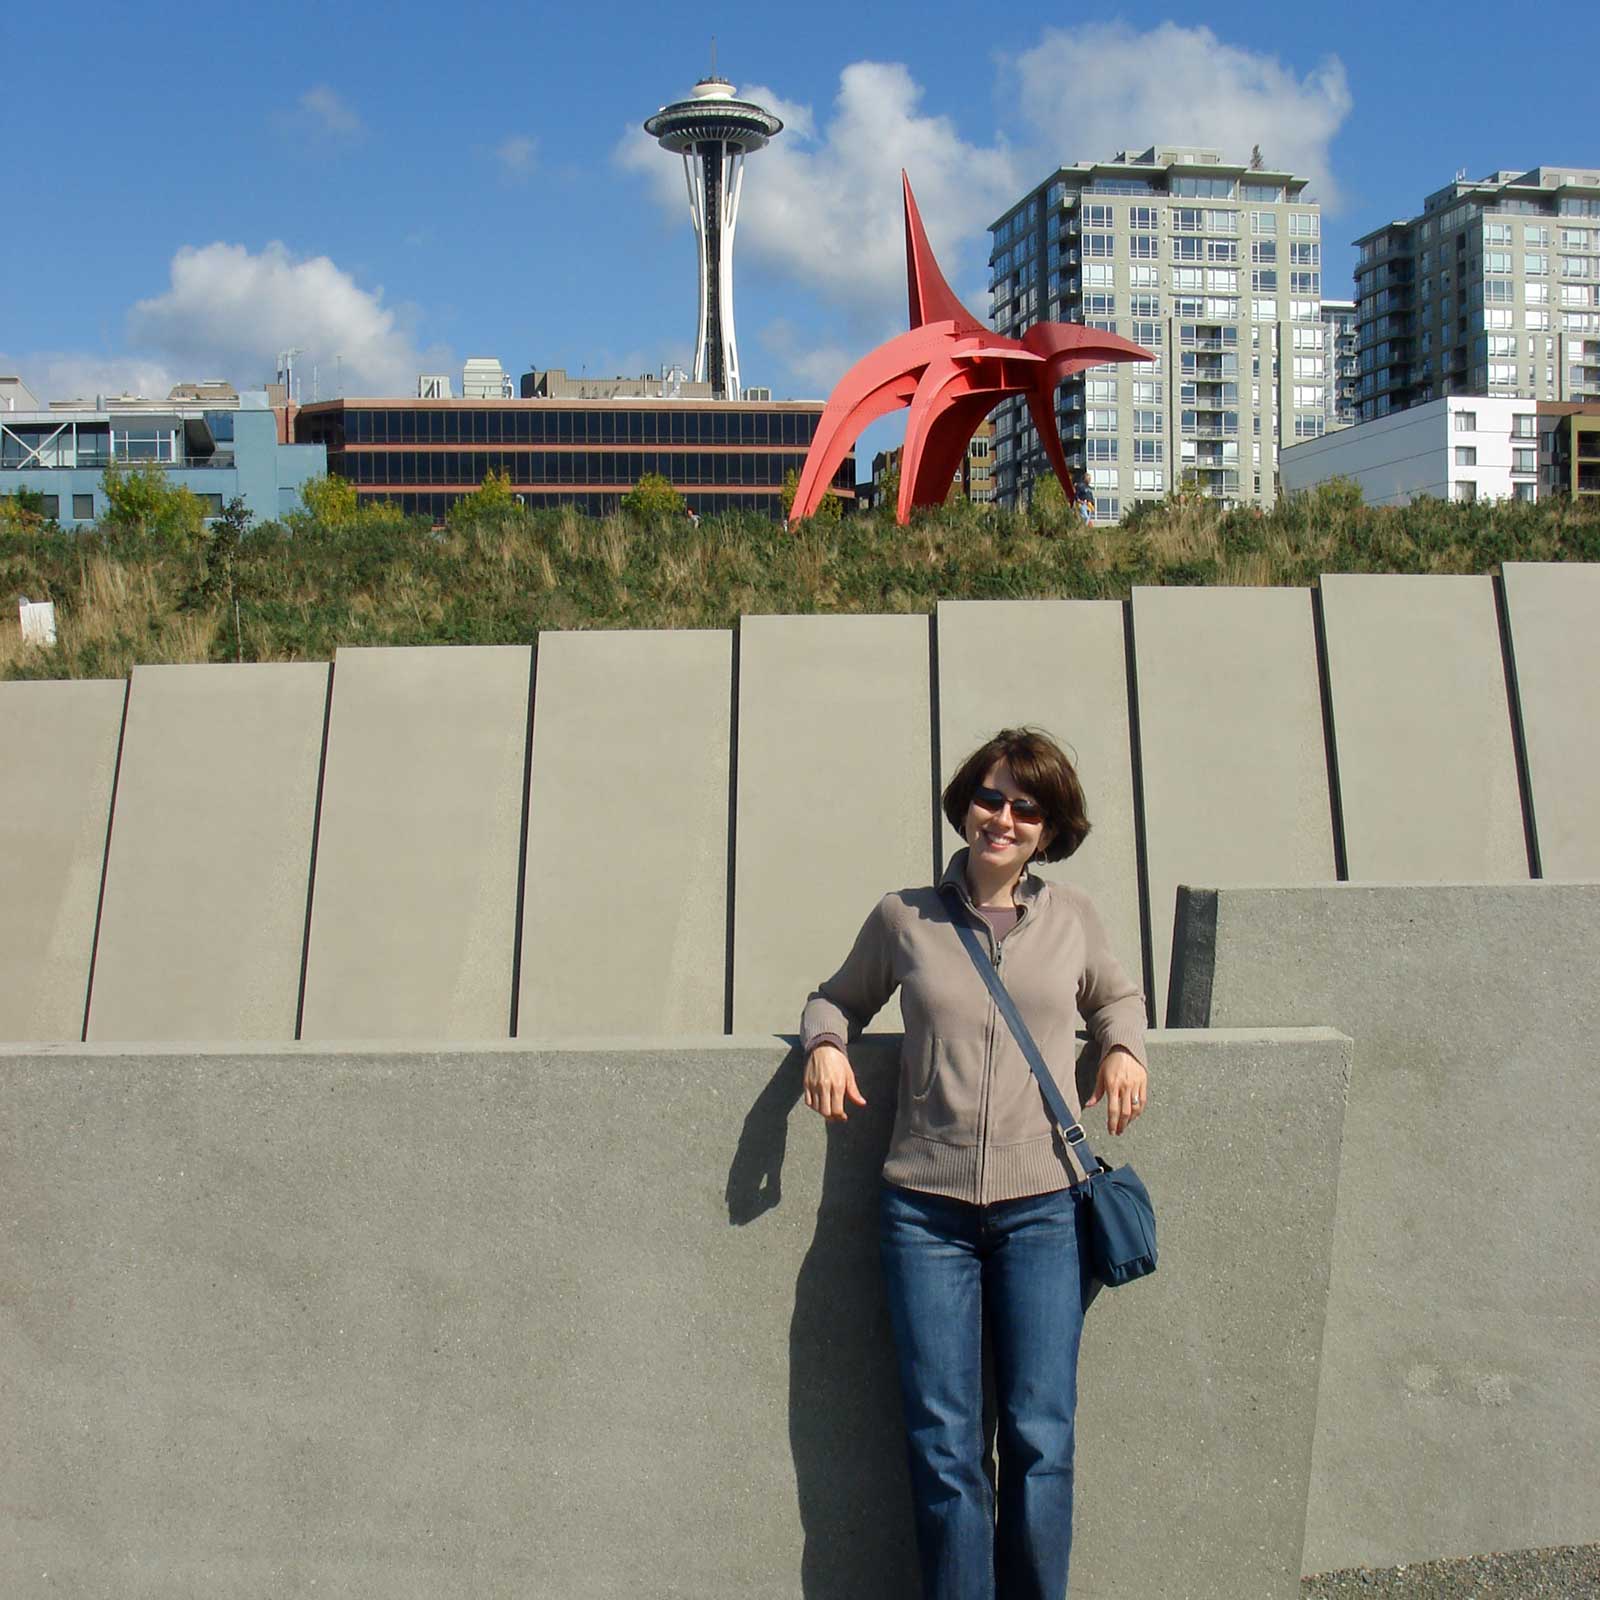 Rebecca with a large red modern art sculpture and the Space Needle in the
background